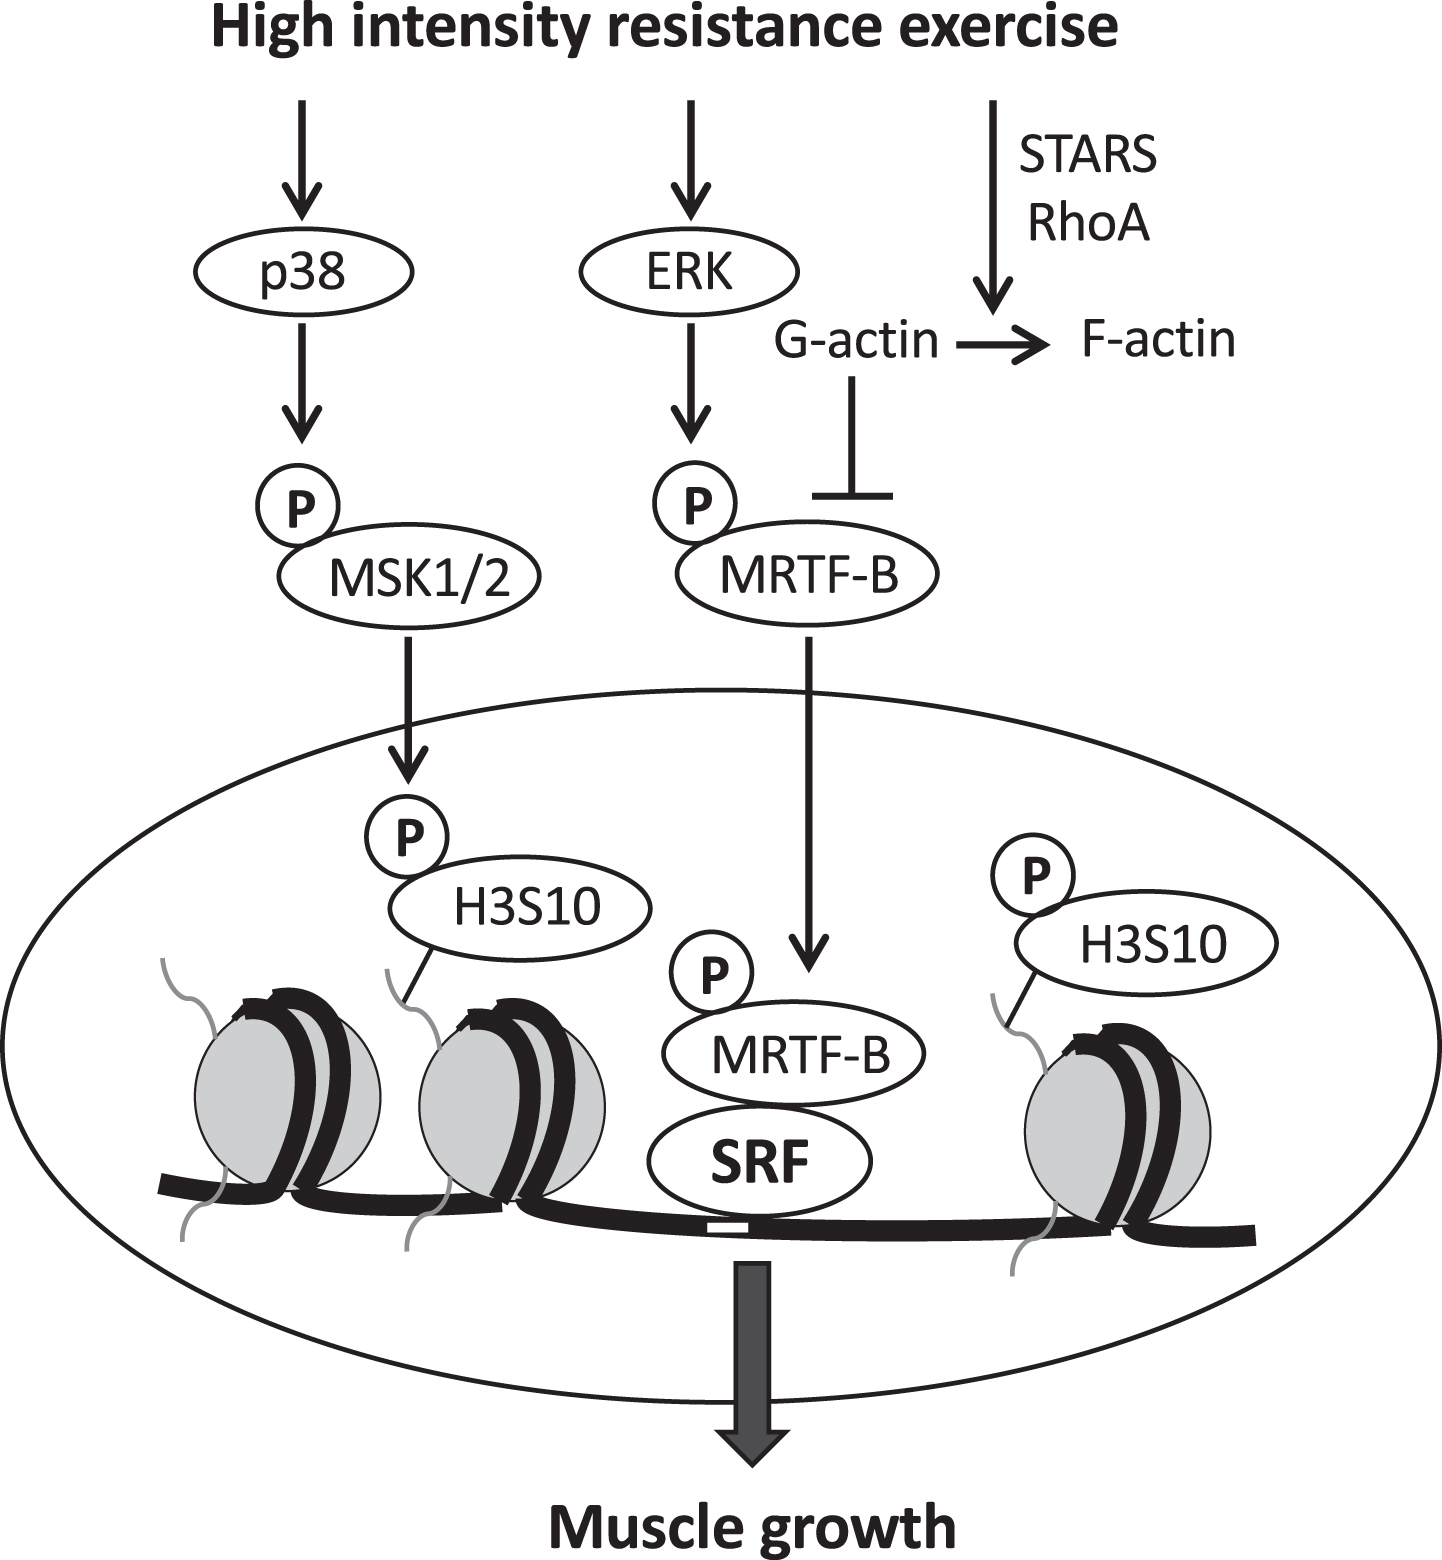 Signaling pathways regulating the activity of the transcription factor SRF (serum response factor). SRF is activated by high intensity resistance exercise via nuclear translocation of myocardin related transcription factor B (MRTF-B), which is induced by ERK-dependent phopshorylation on serine 66, and by actin polymerization induced by STARS and RhoA, thus relieving the G-actin inhibitory effect on MRTF. SRF activation also requires chromatin remodeling which is induced by histone 3 phosphorylation on serine 10 (H3S10). H3S10 phosphorylation is mediated by mitogen- and stress-activated kinases (MSK1/2), which are in turn activated by p38 MAPK. (Modified from [94]).